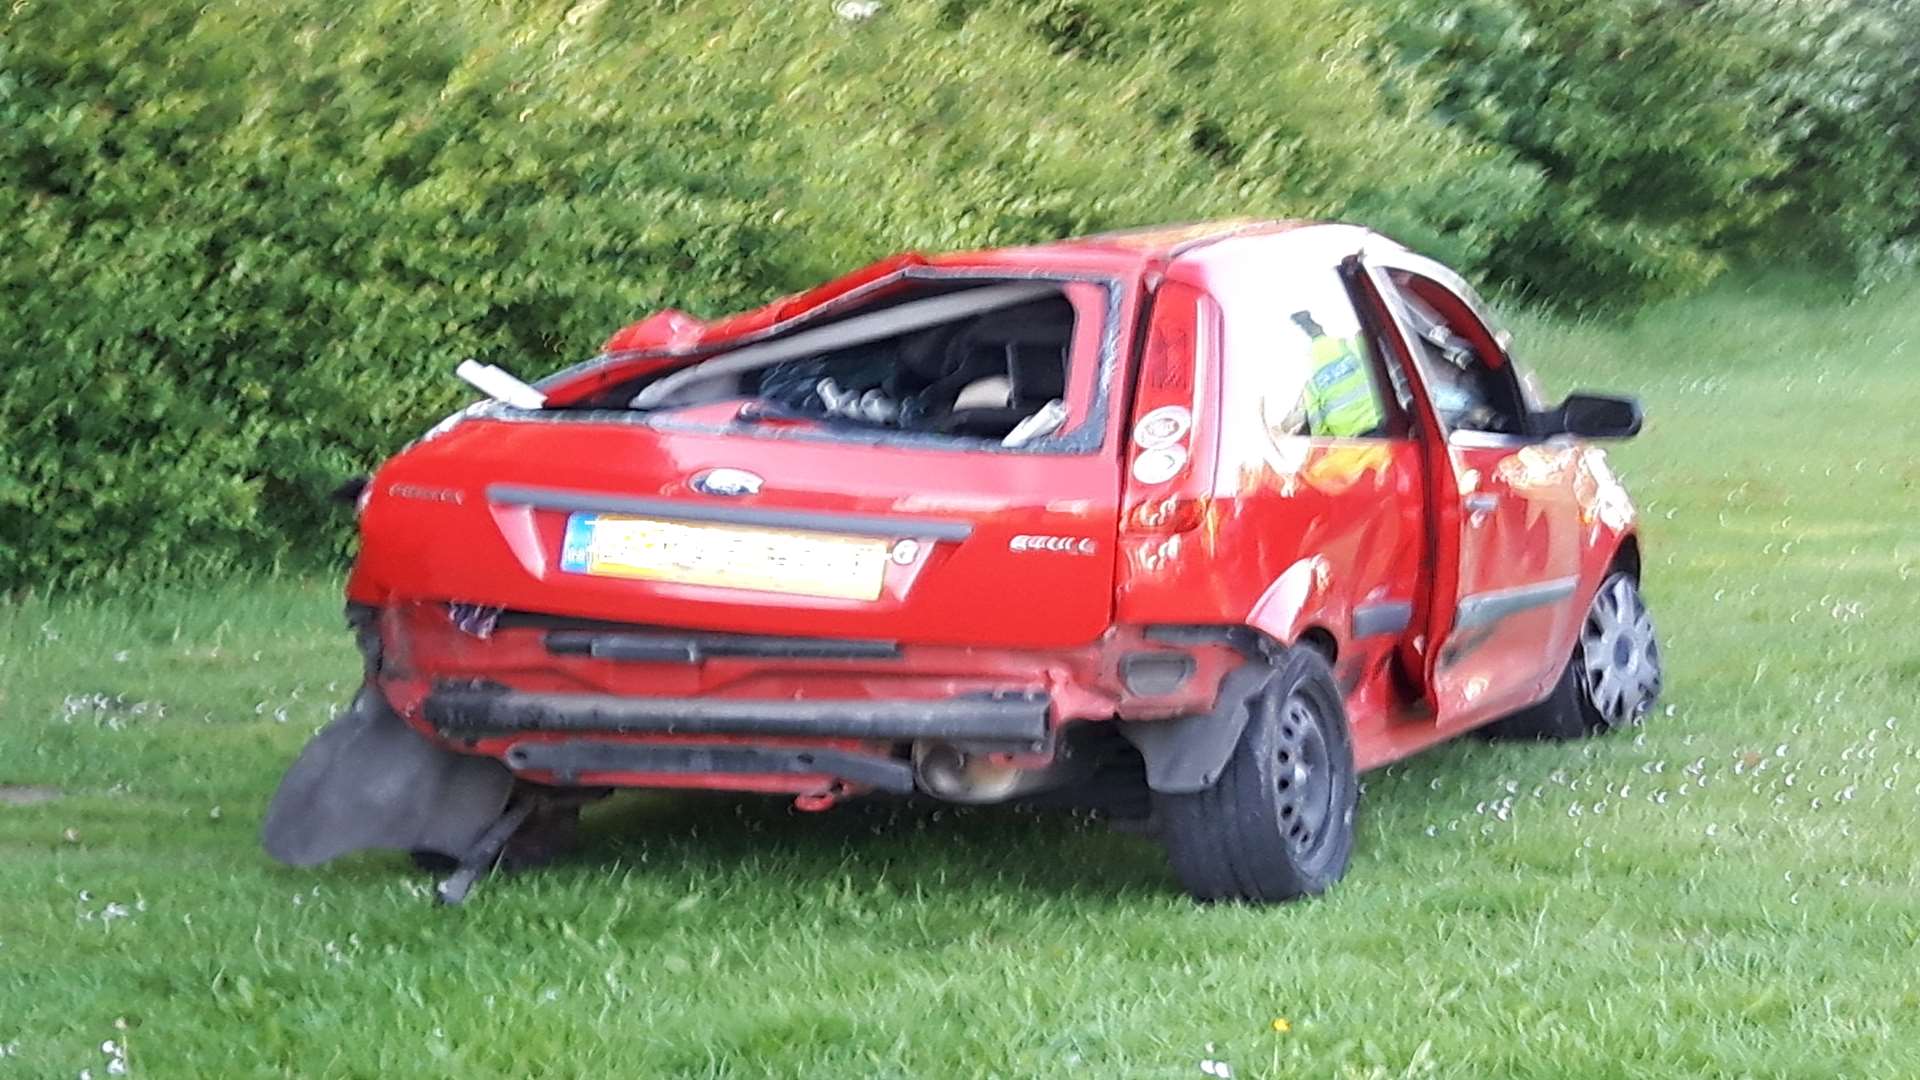 The wreckage of one of the cars involved